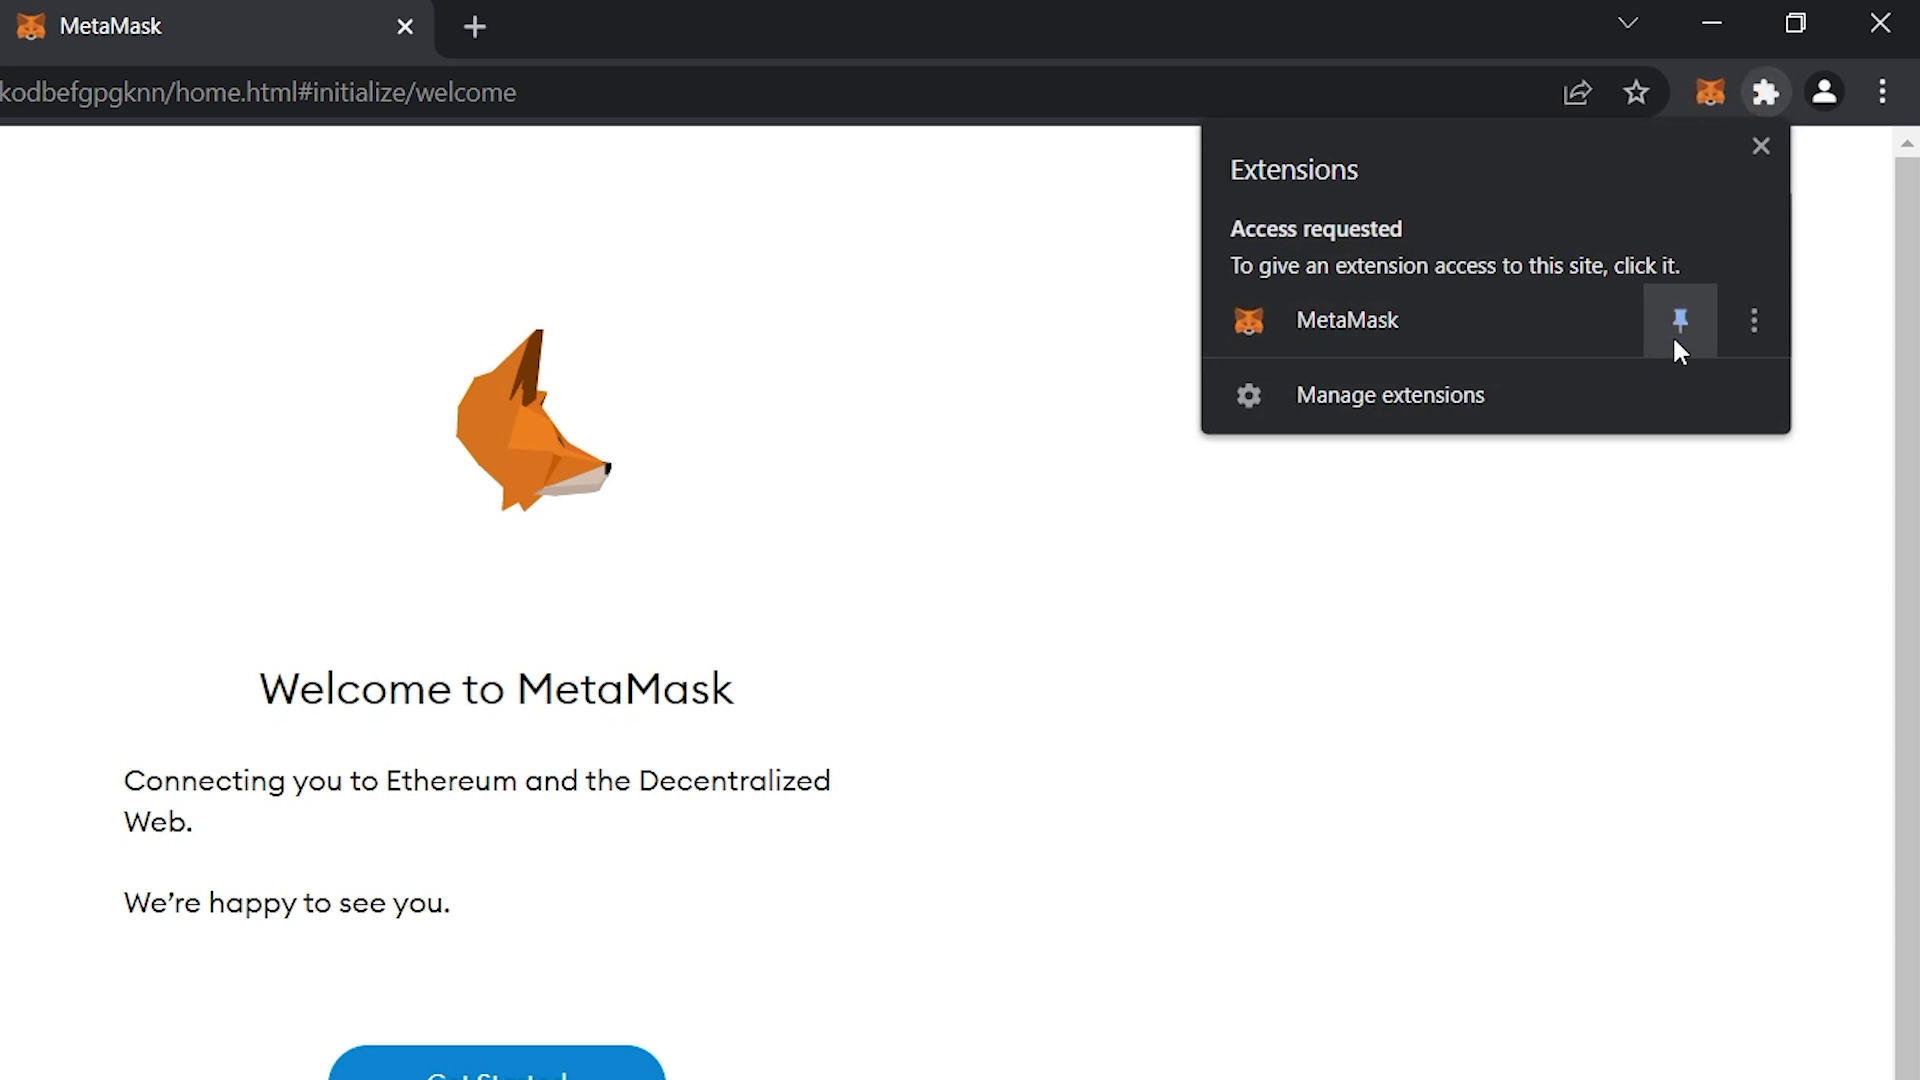 MetaMask Added To Chrome Extension Toolbar